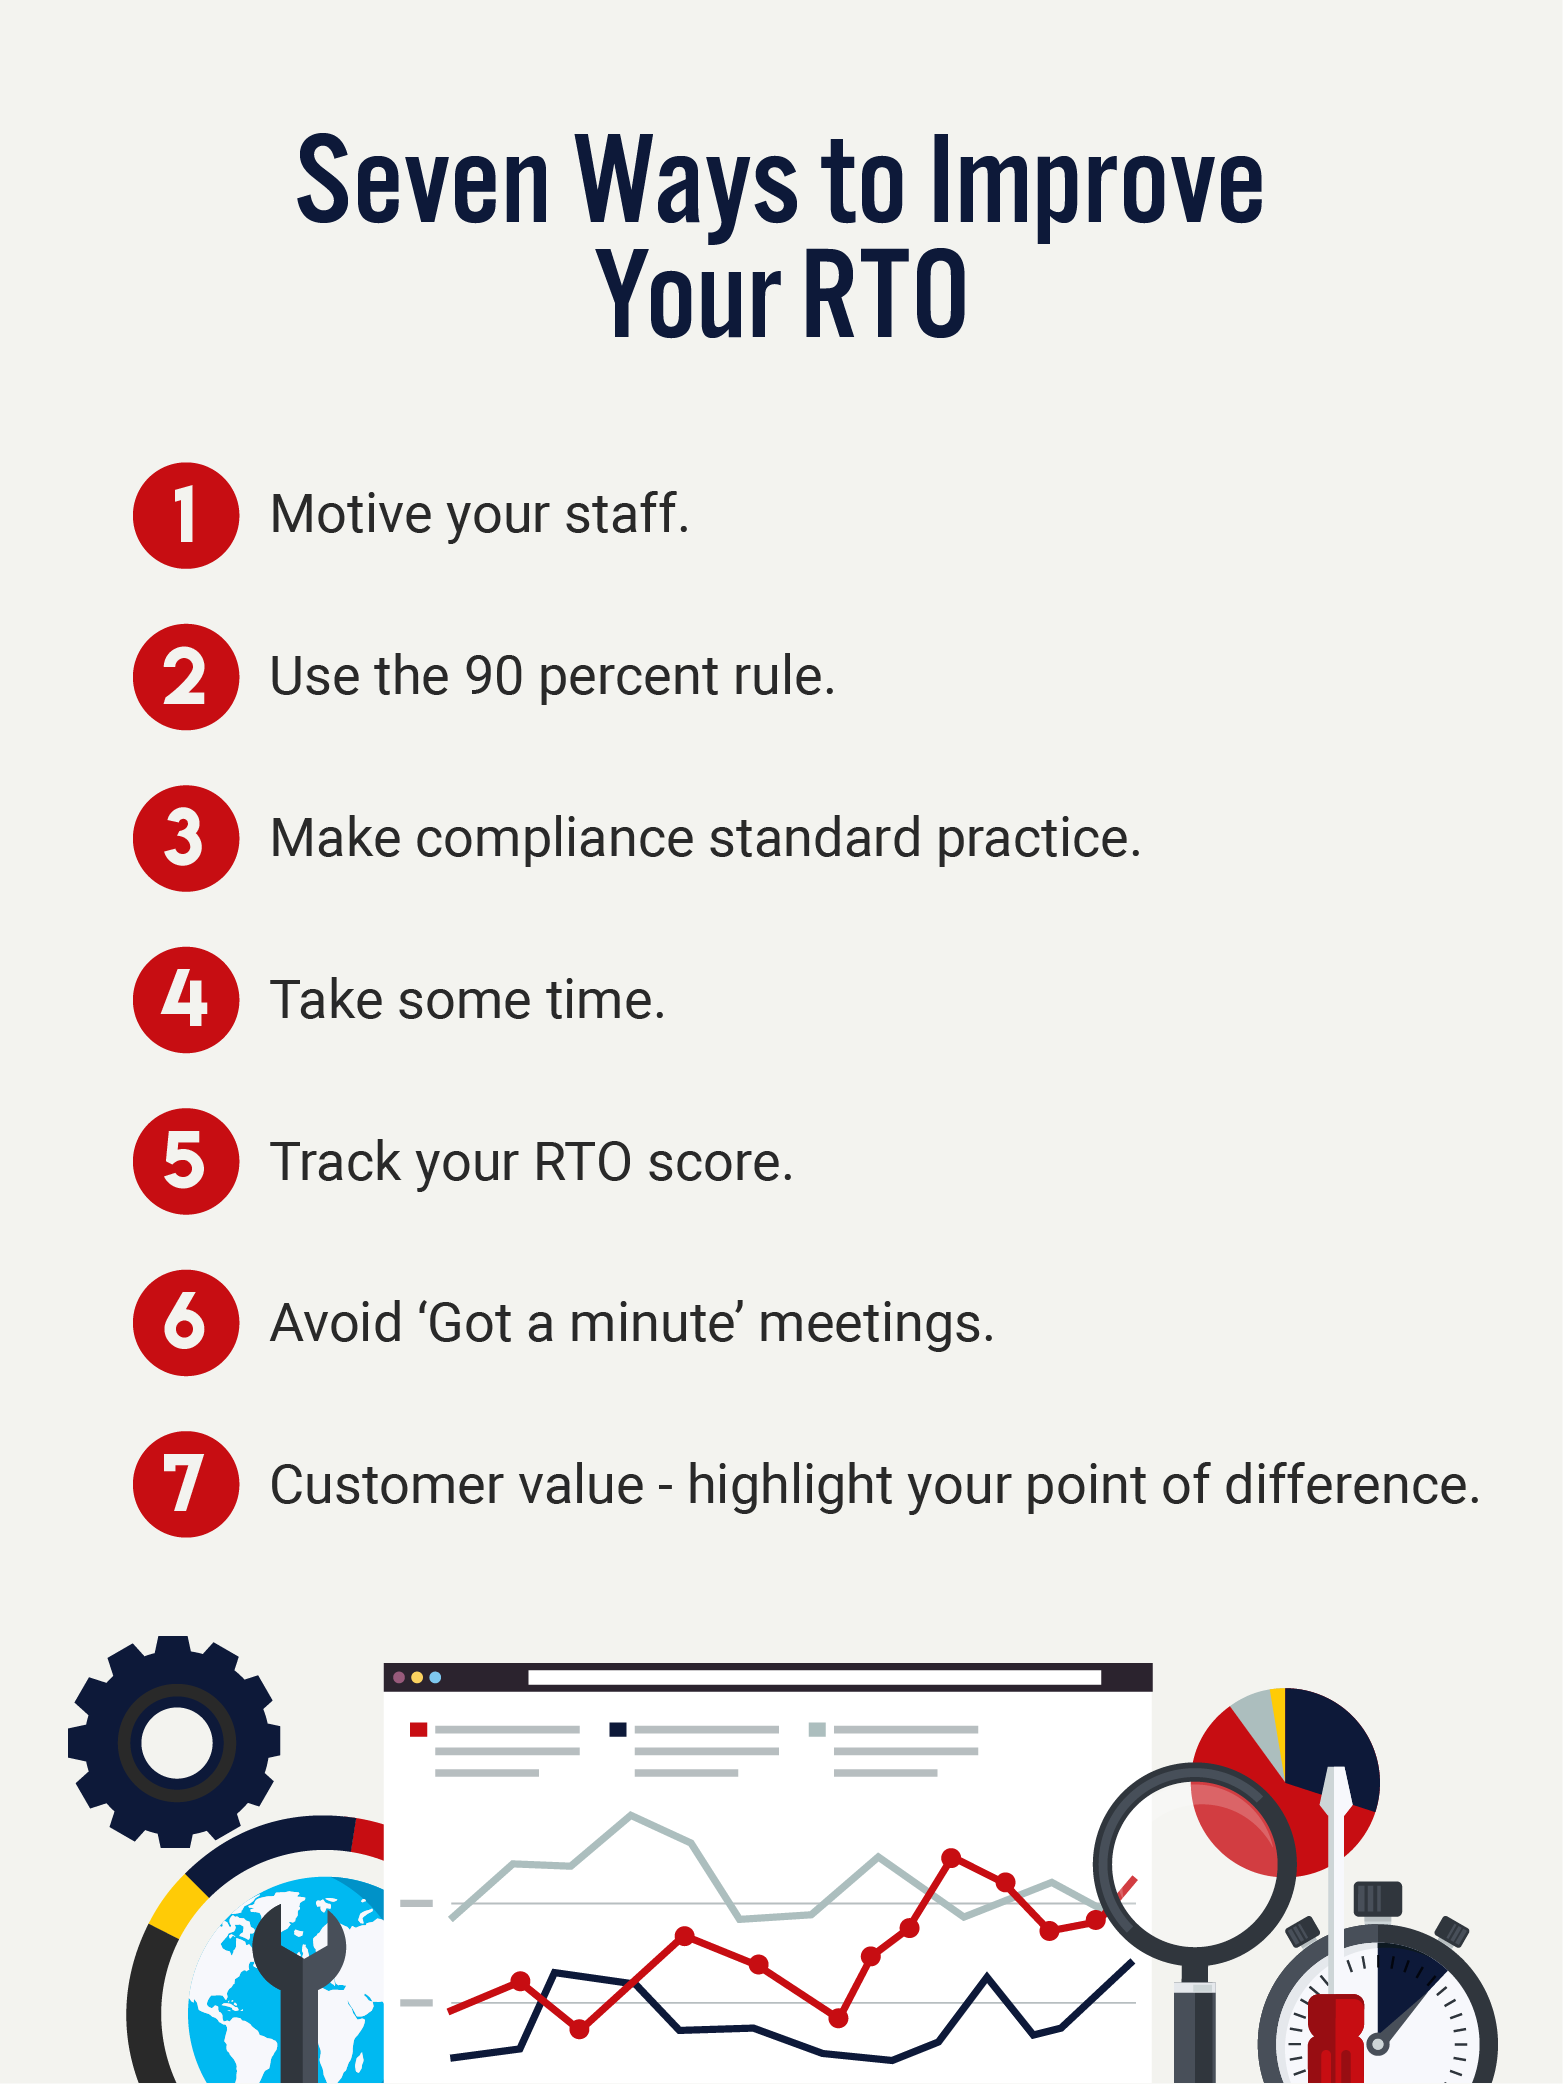 Seven Ways to Improve your RTO - Tip Sheet